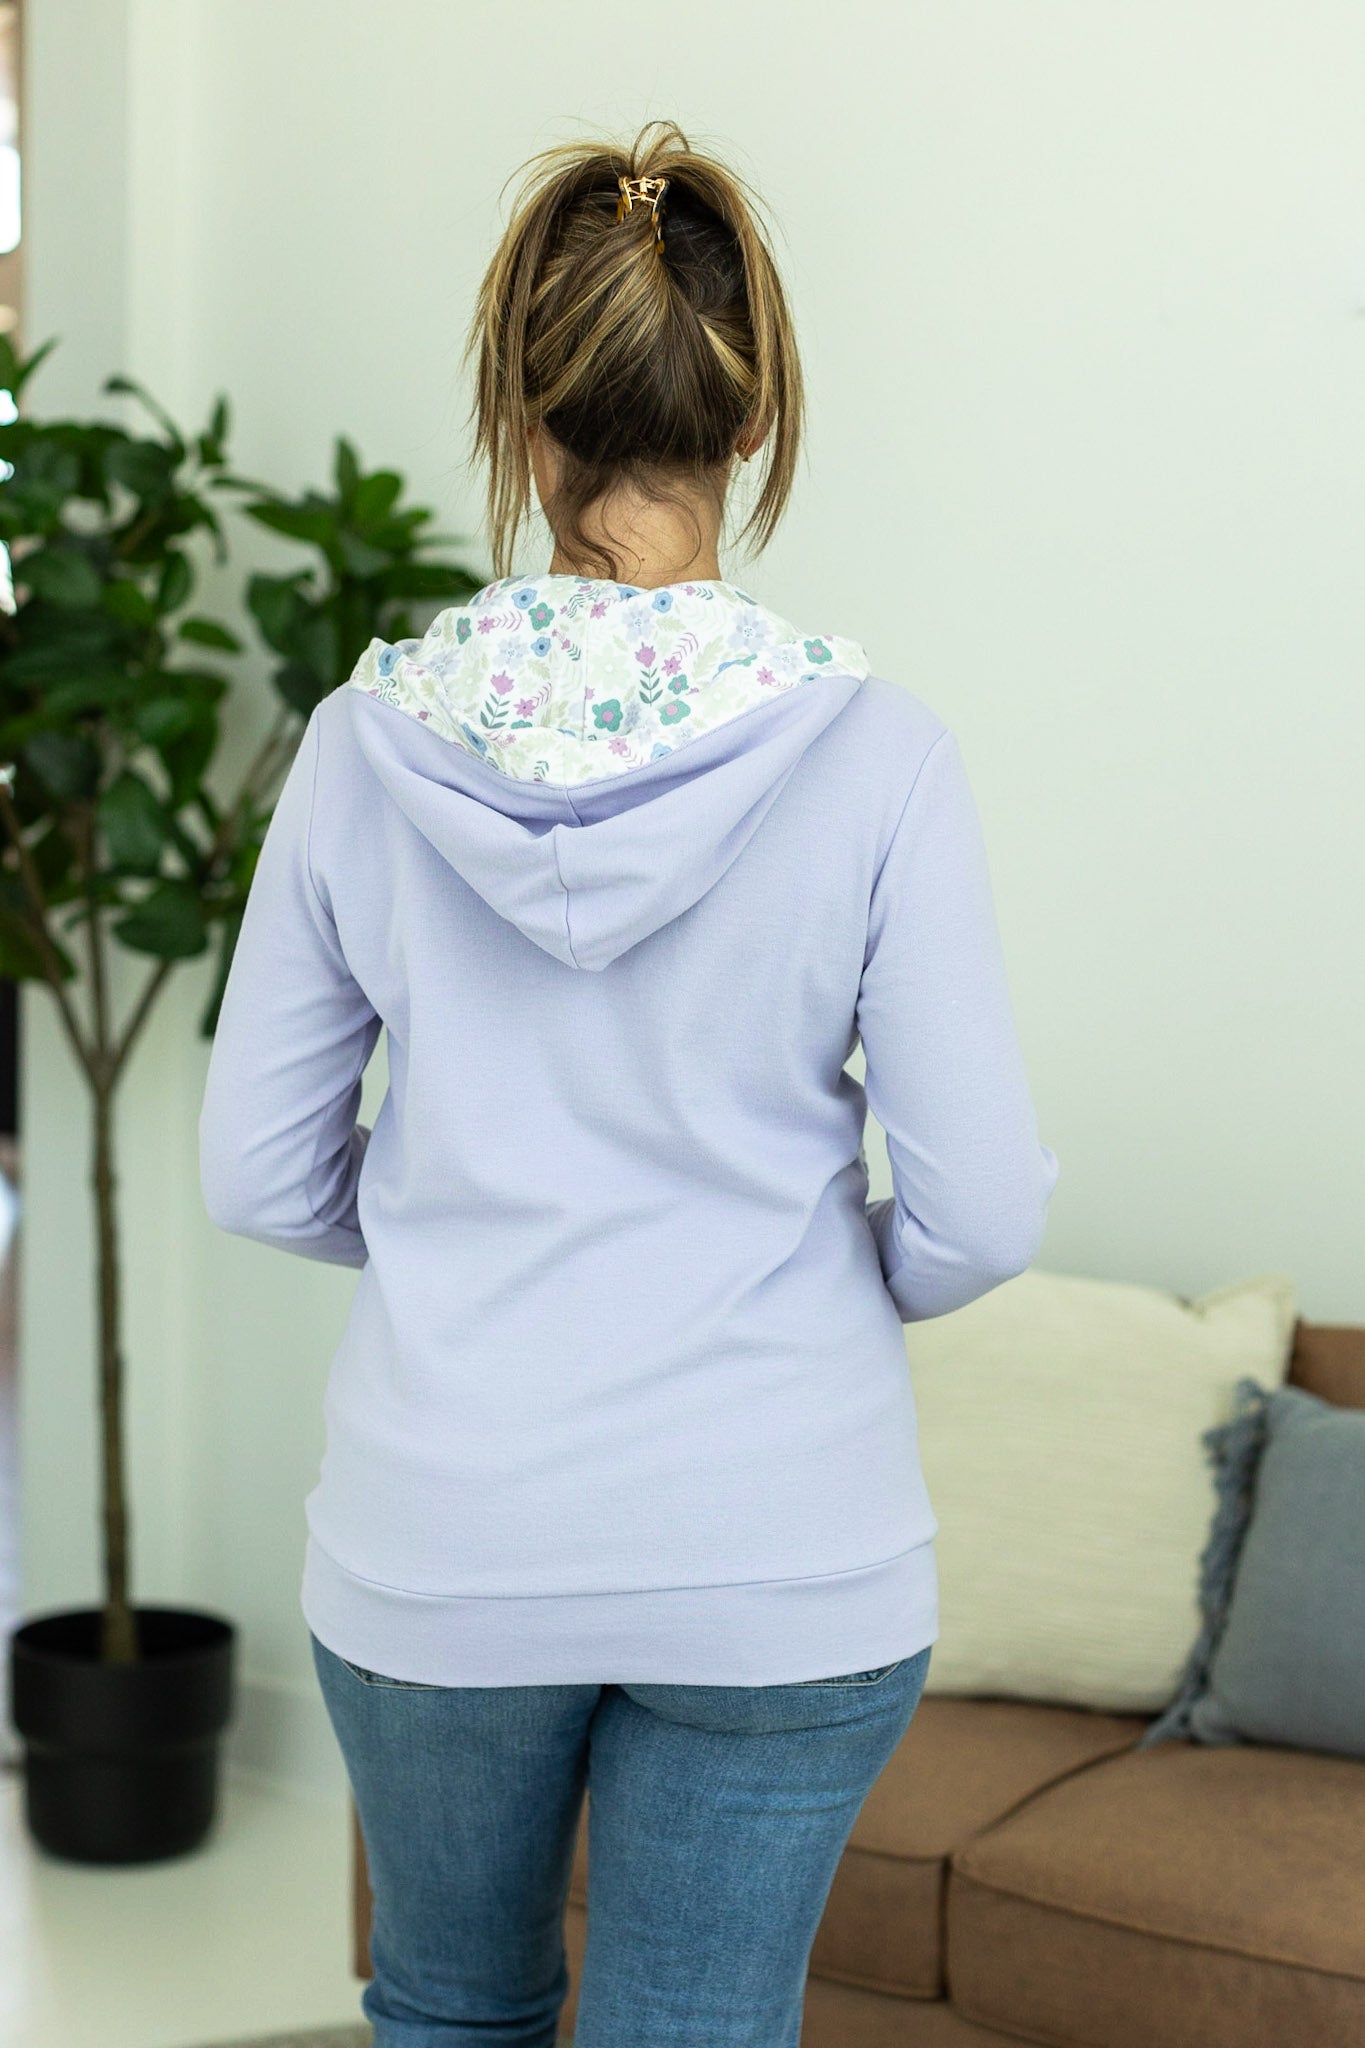 Michelle Mae Lavender Floral  Avery Accent Half Zip Hoodie